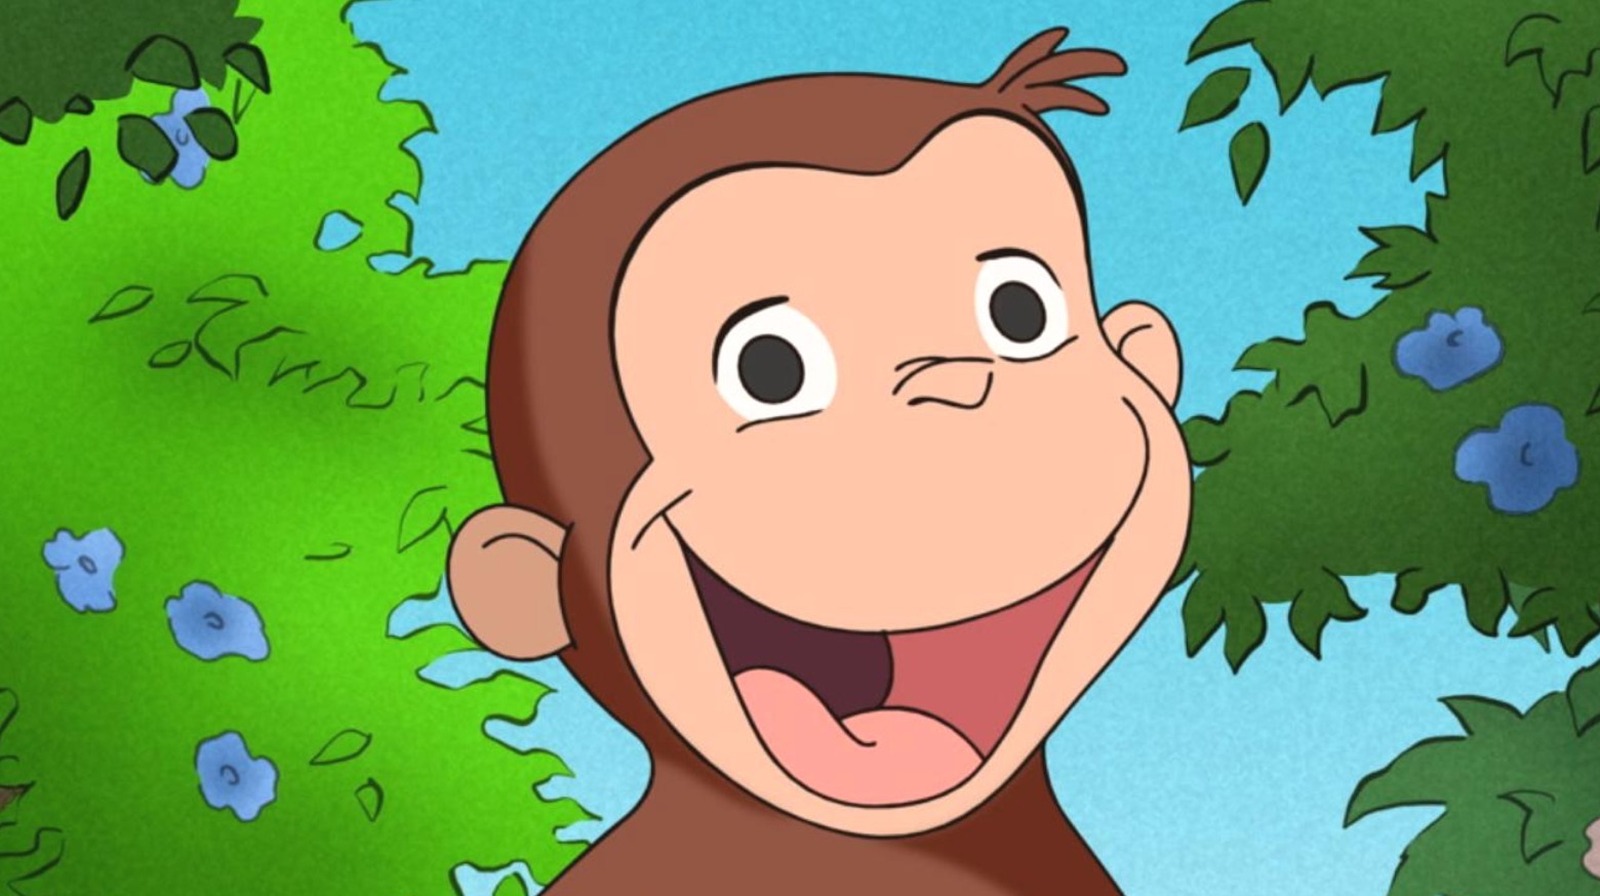 how many curious george episodes in total?